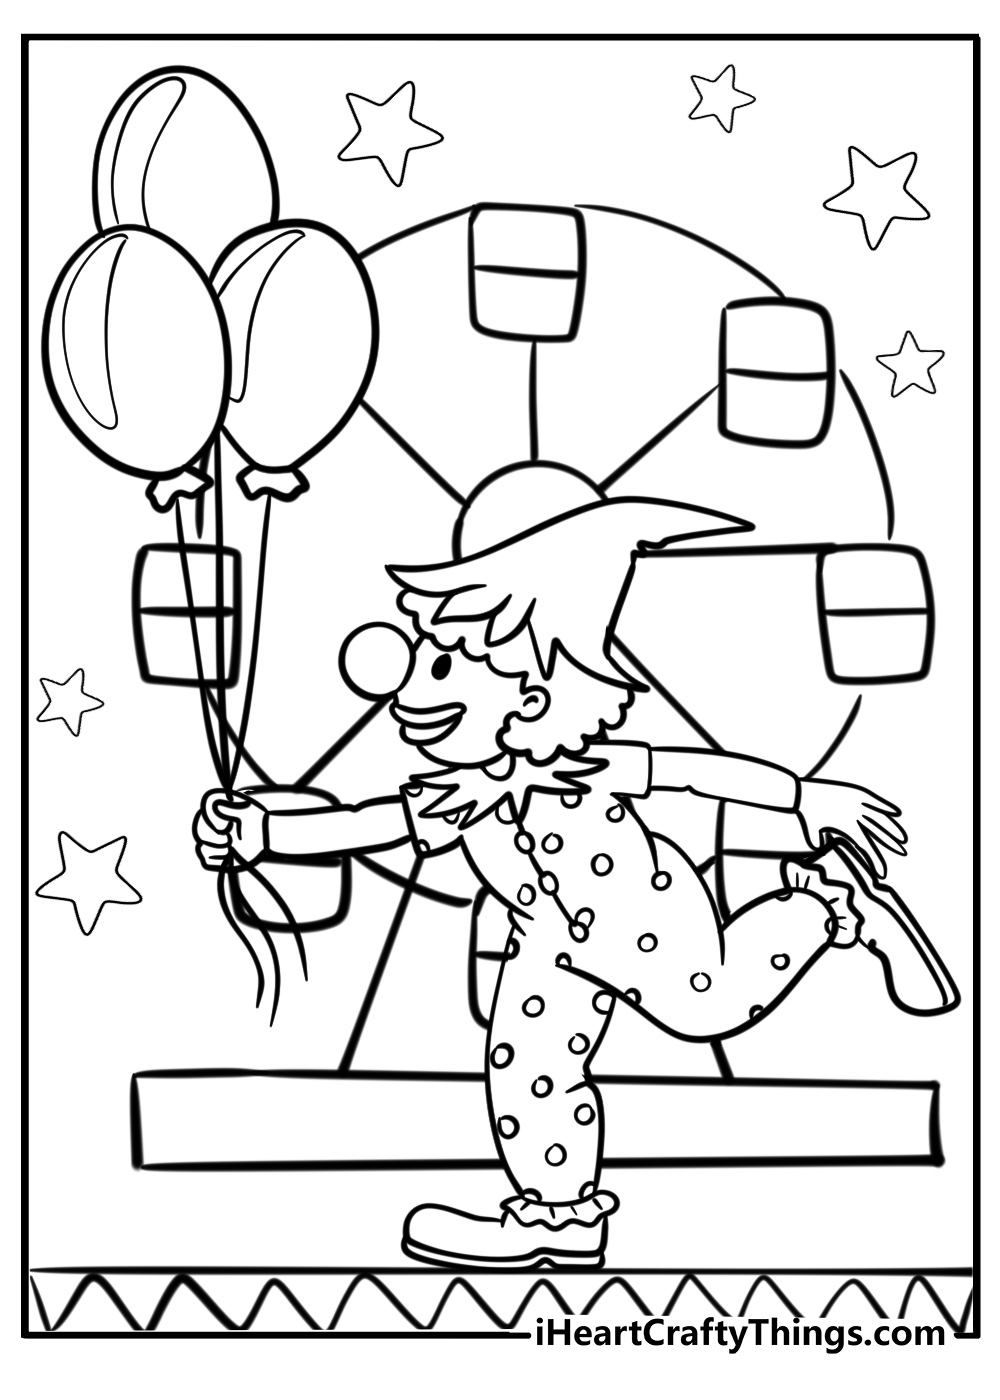 Circus coloring page of simple clown with balloons